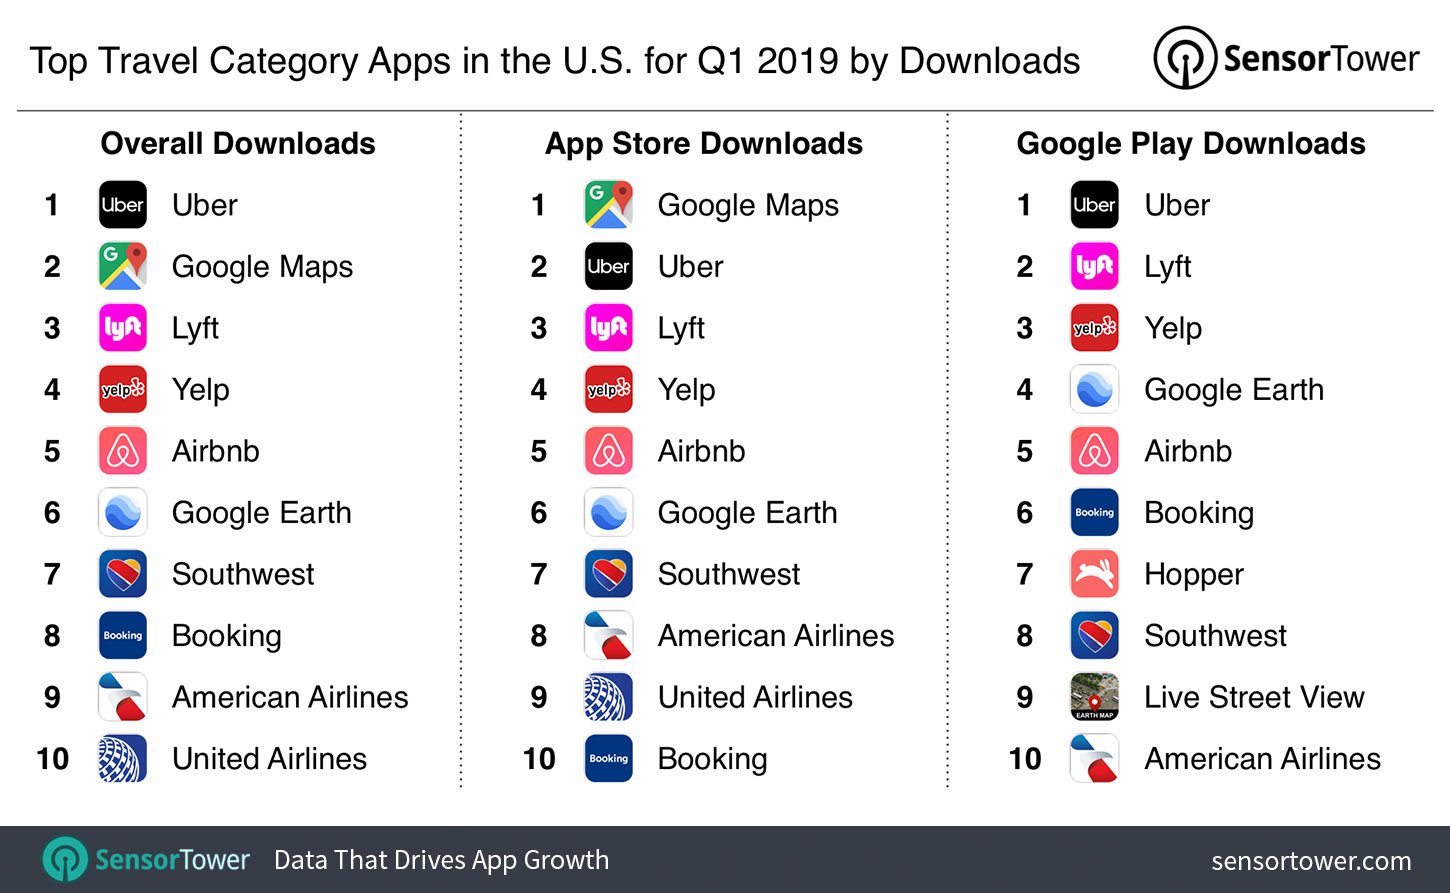 Top Travel Category Apps in the U.S. for Q1 2019 by Downloads